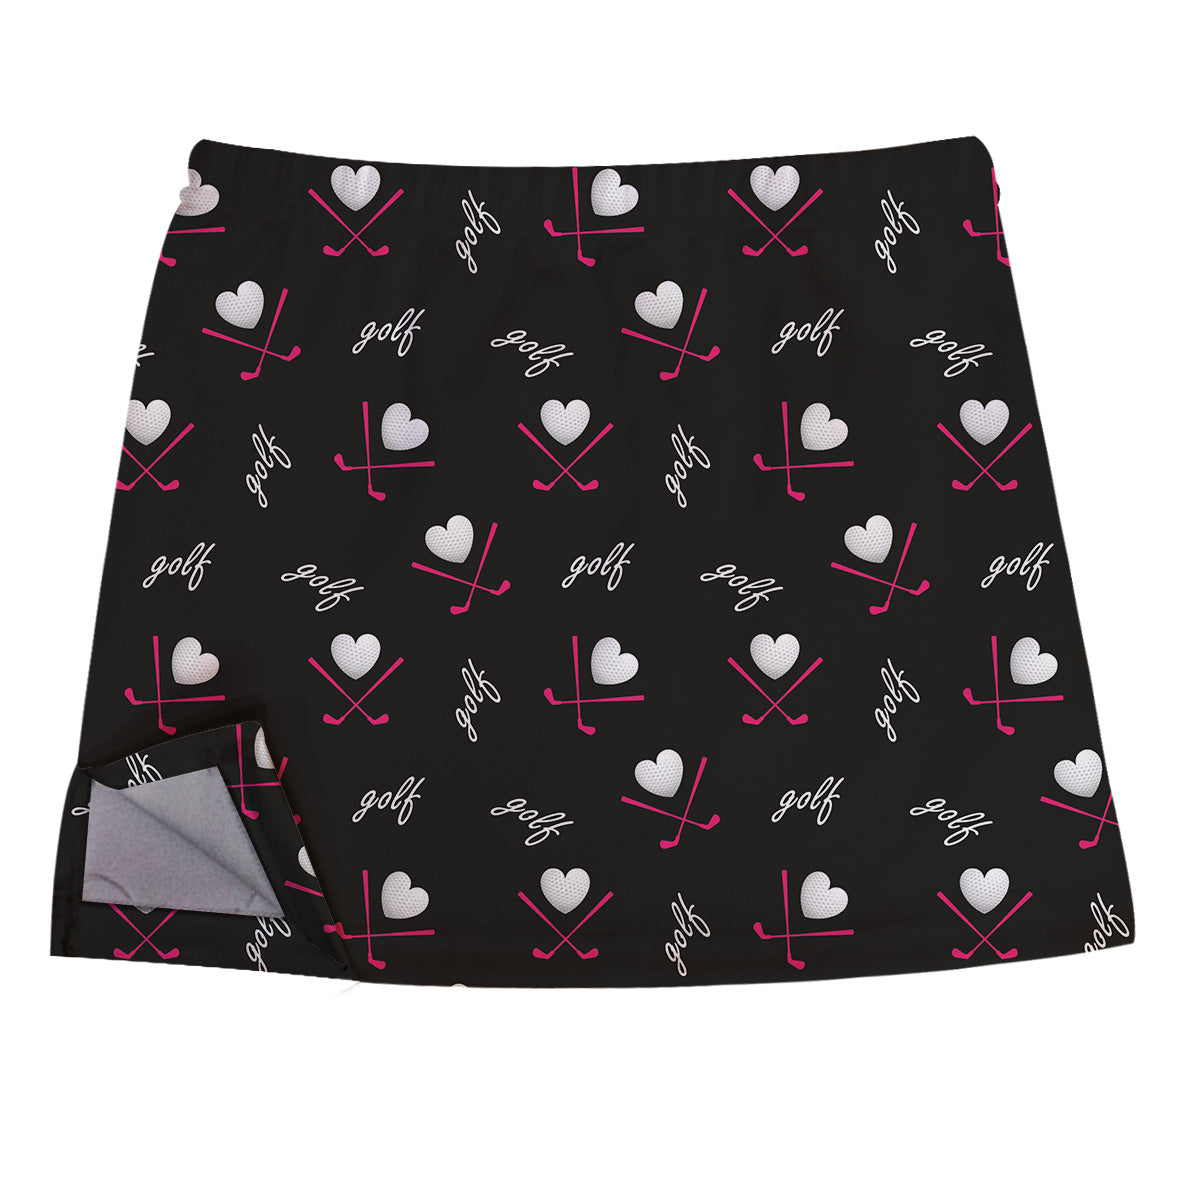 Golf And Heart Print Black Skirt With Side Vents - Wimziy&Co.